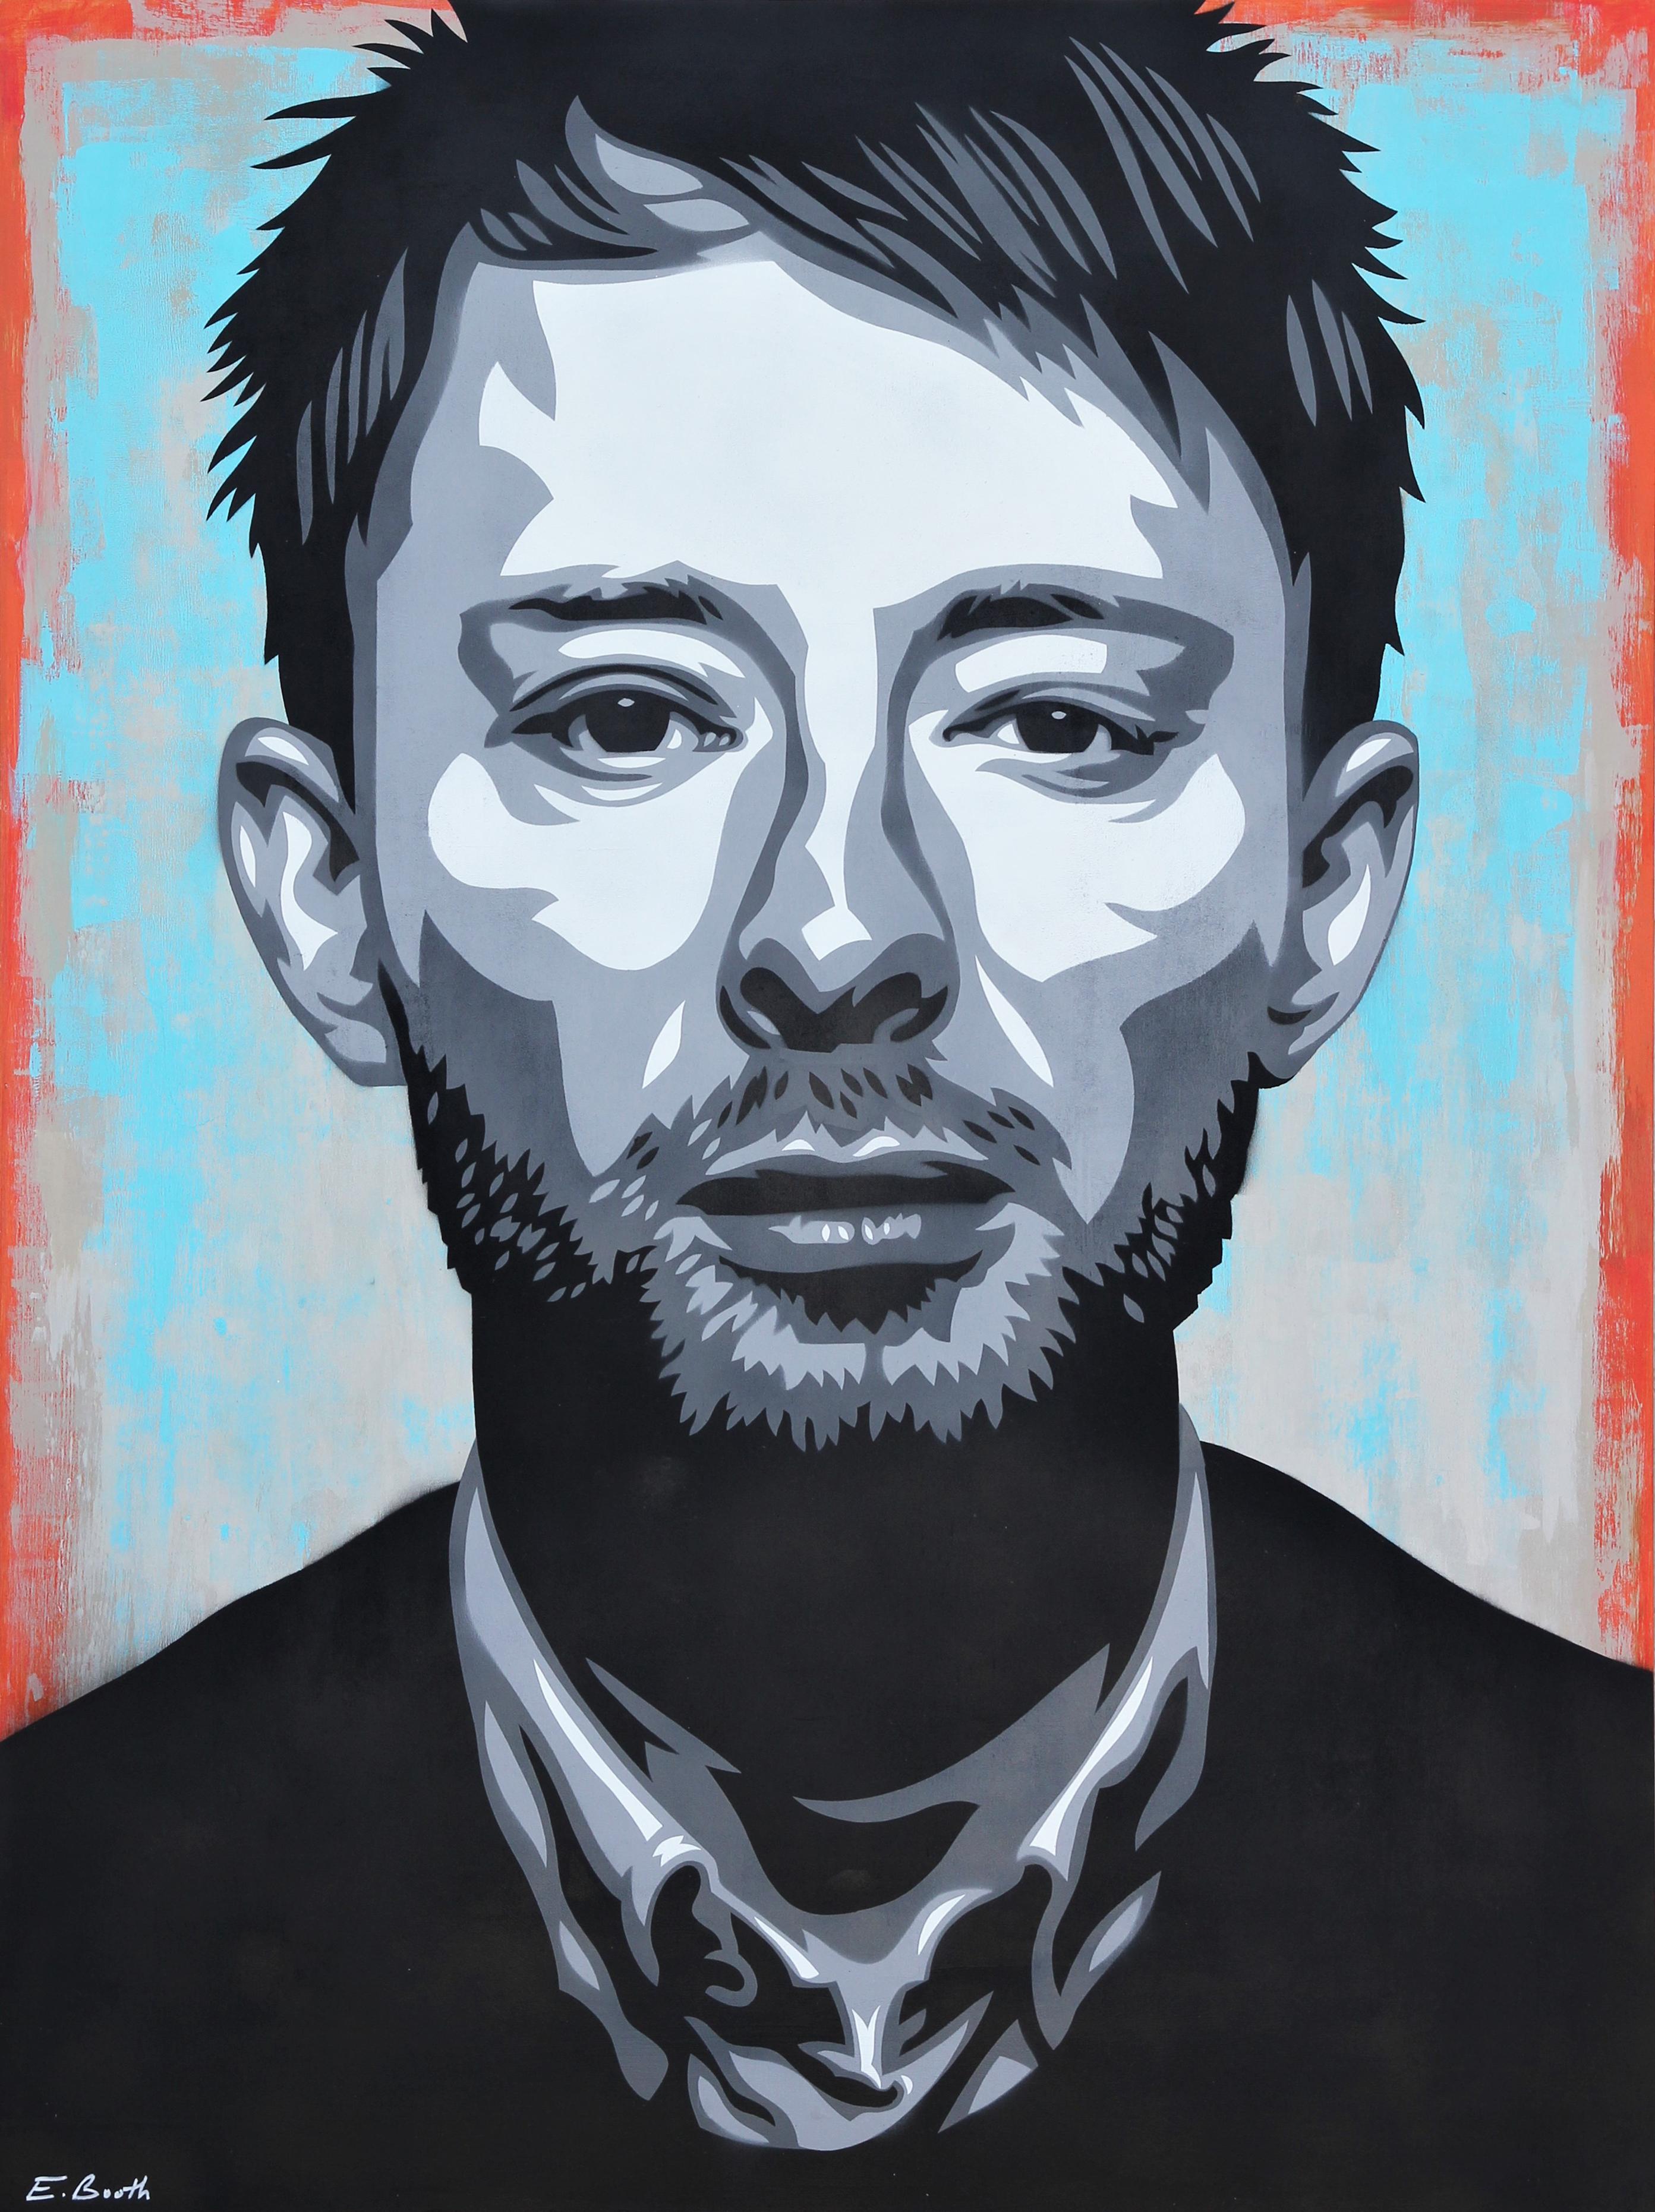 Ed Booth Abstract Painting - Thom Yorke “House of Cards” Teal, Red, and Black Contemporary Abstract Portrait